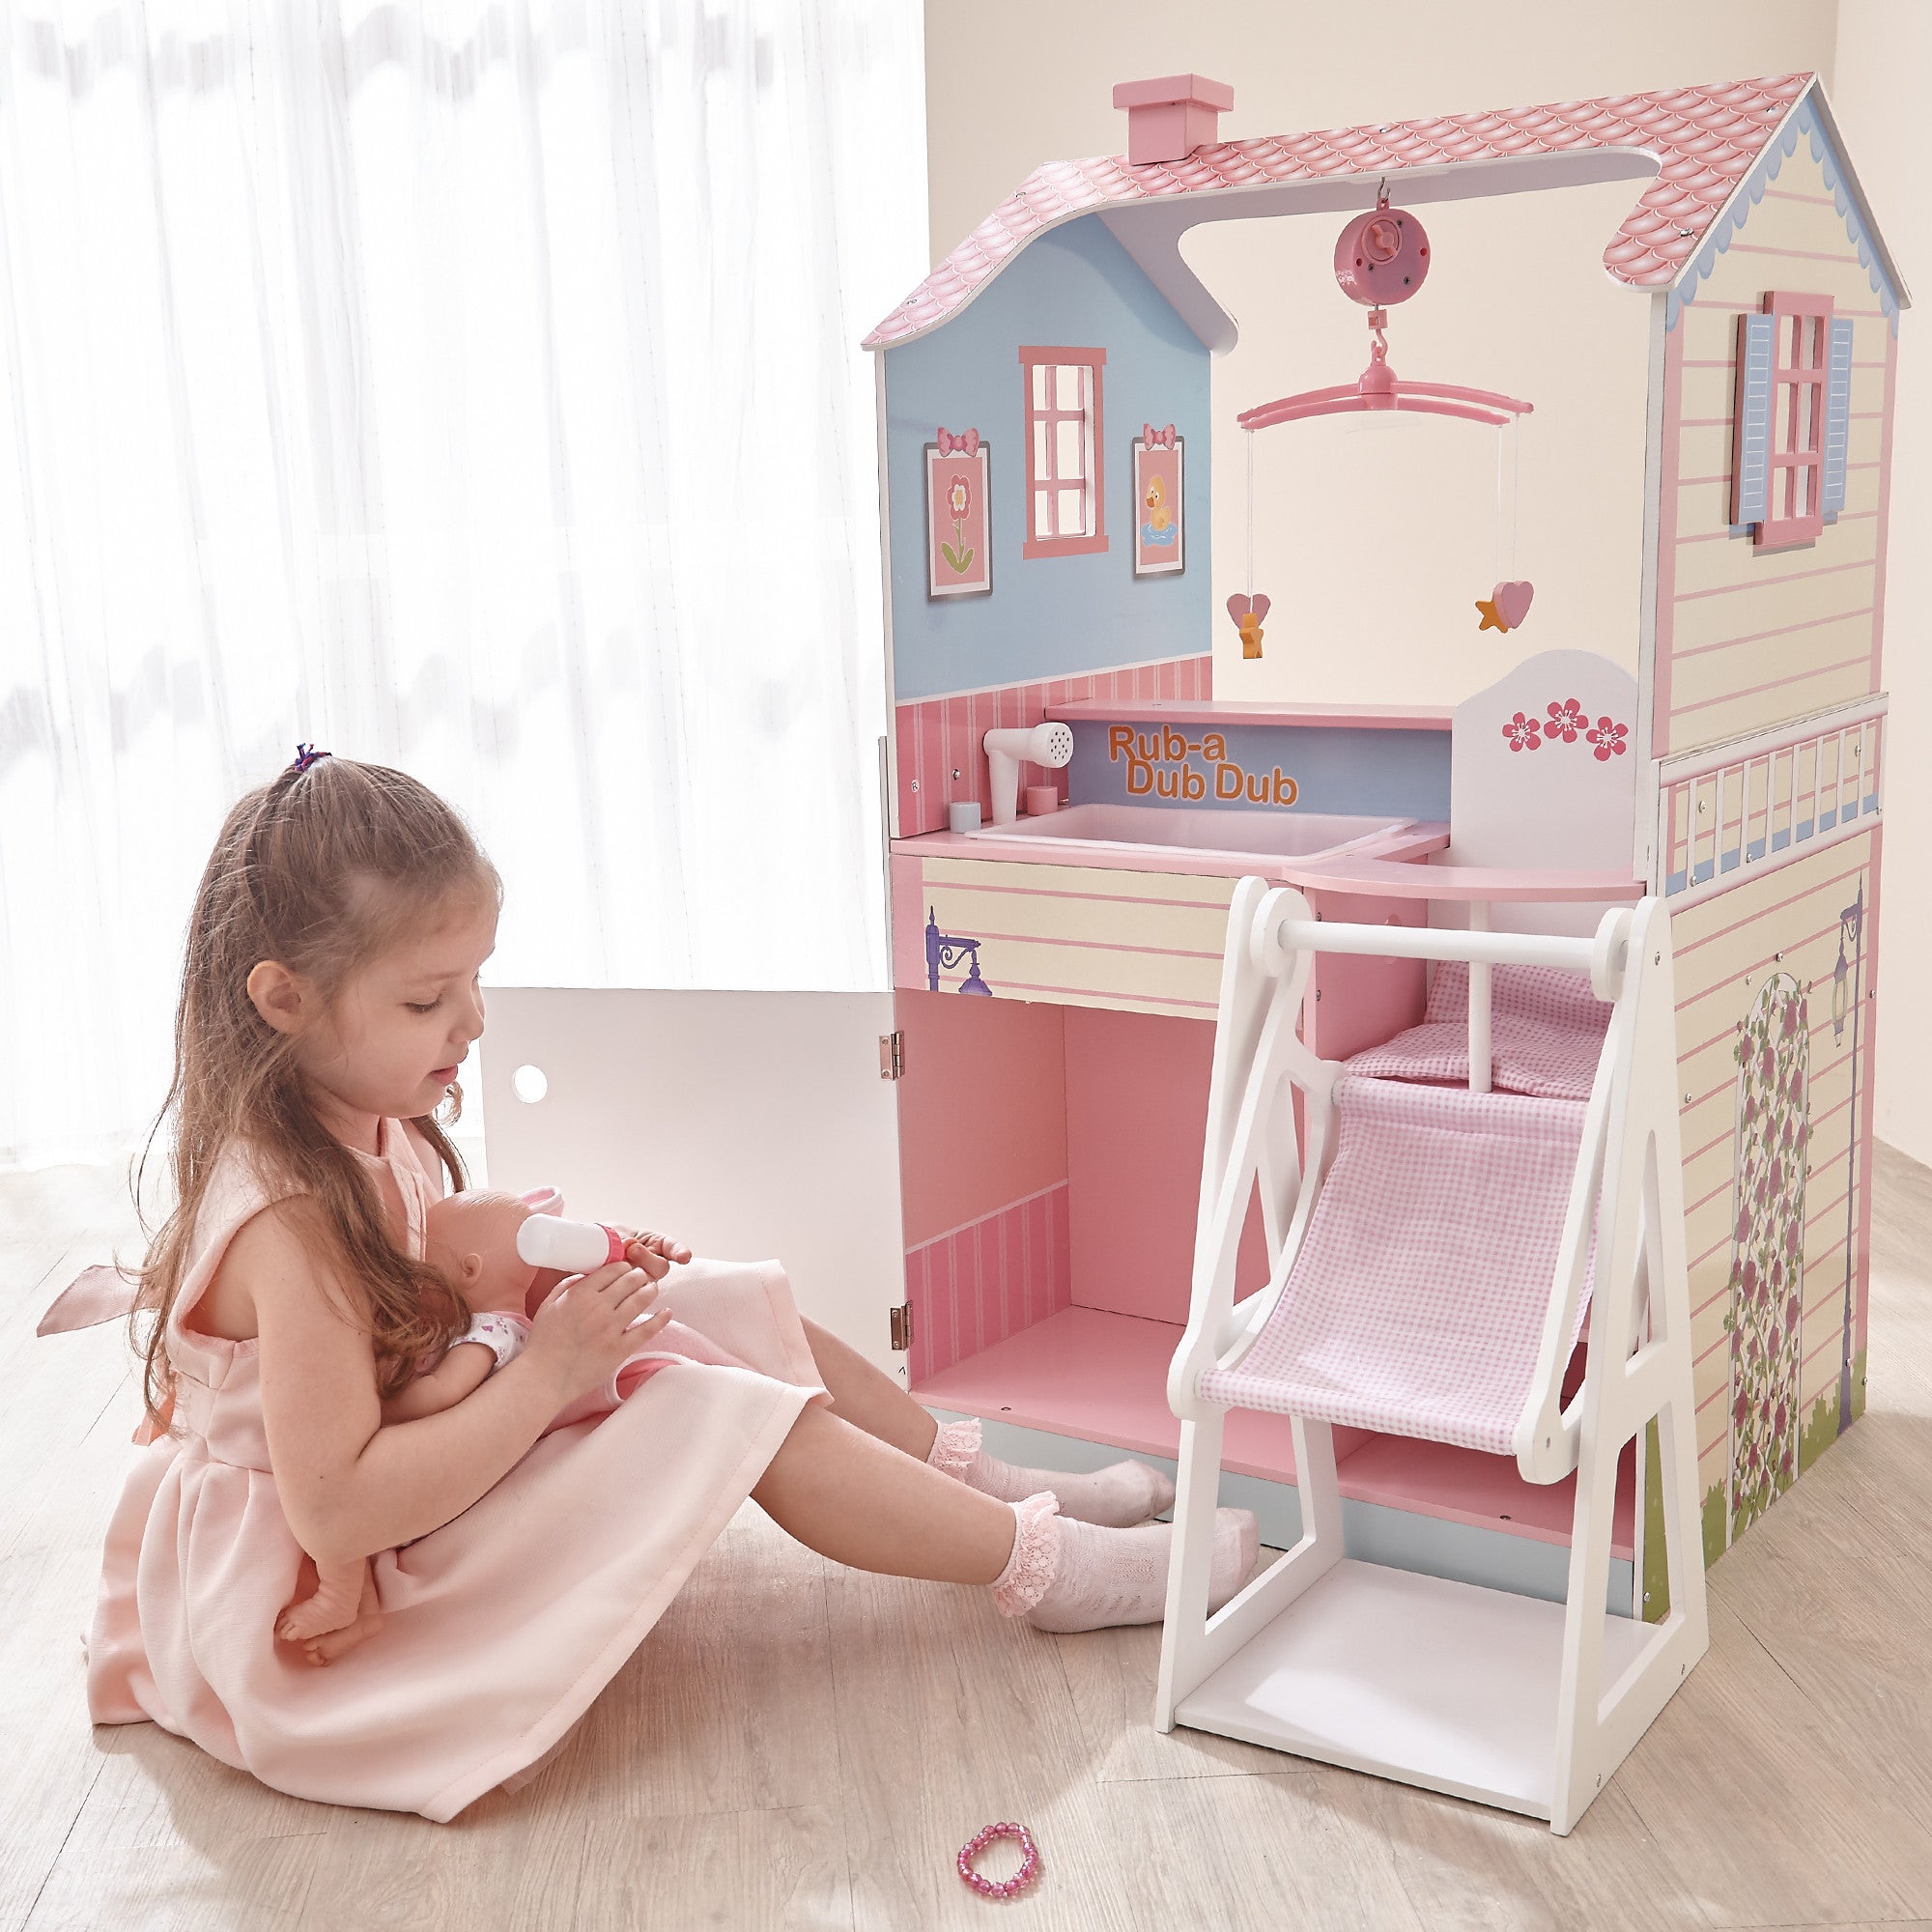 Olivia's Little World Baby Doll Changing Station Dollhouse with Storage, Multicolor